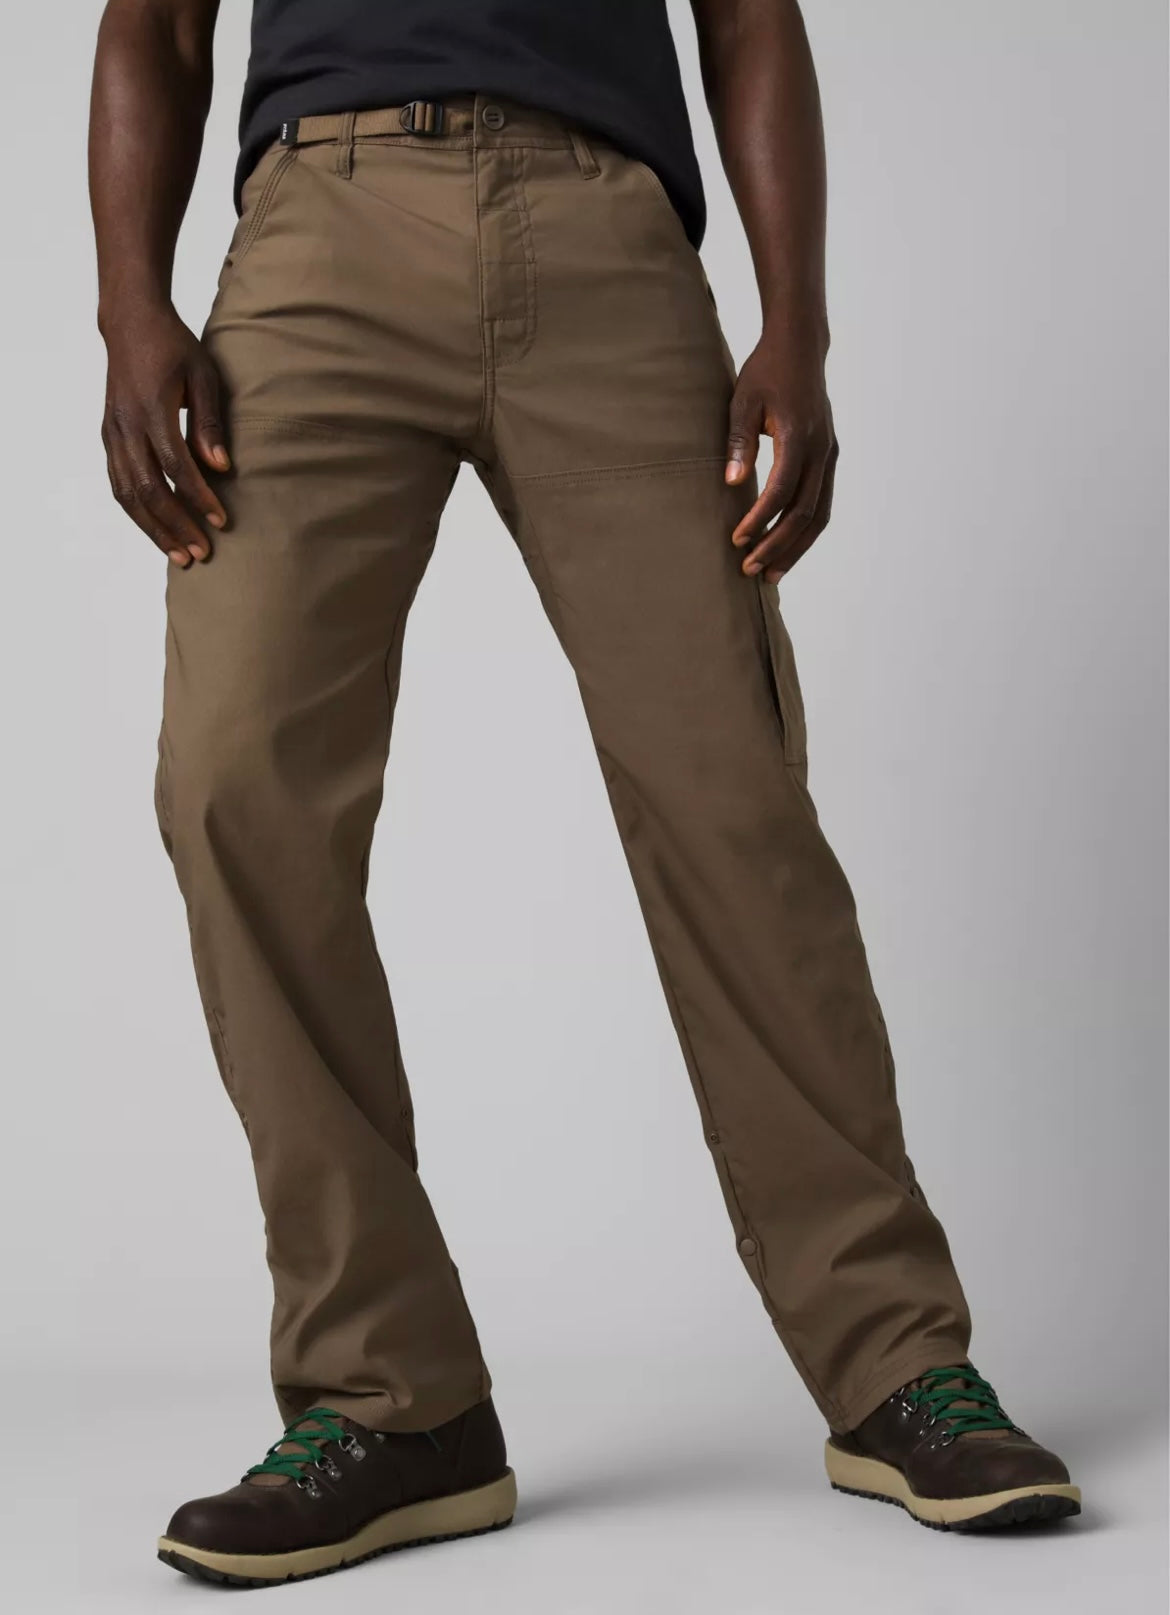 Stretch Zion Pant II 28 - The Benchmark Outdoor Outfitters